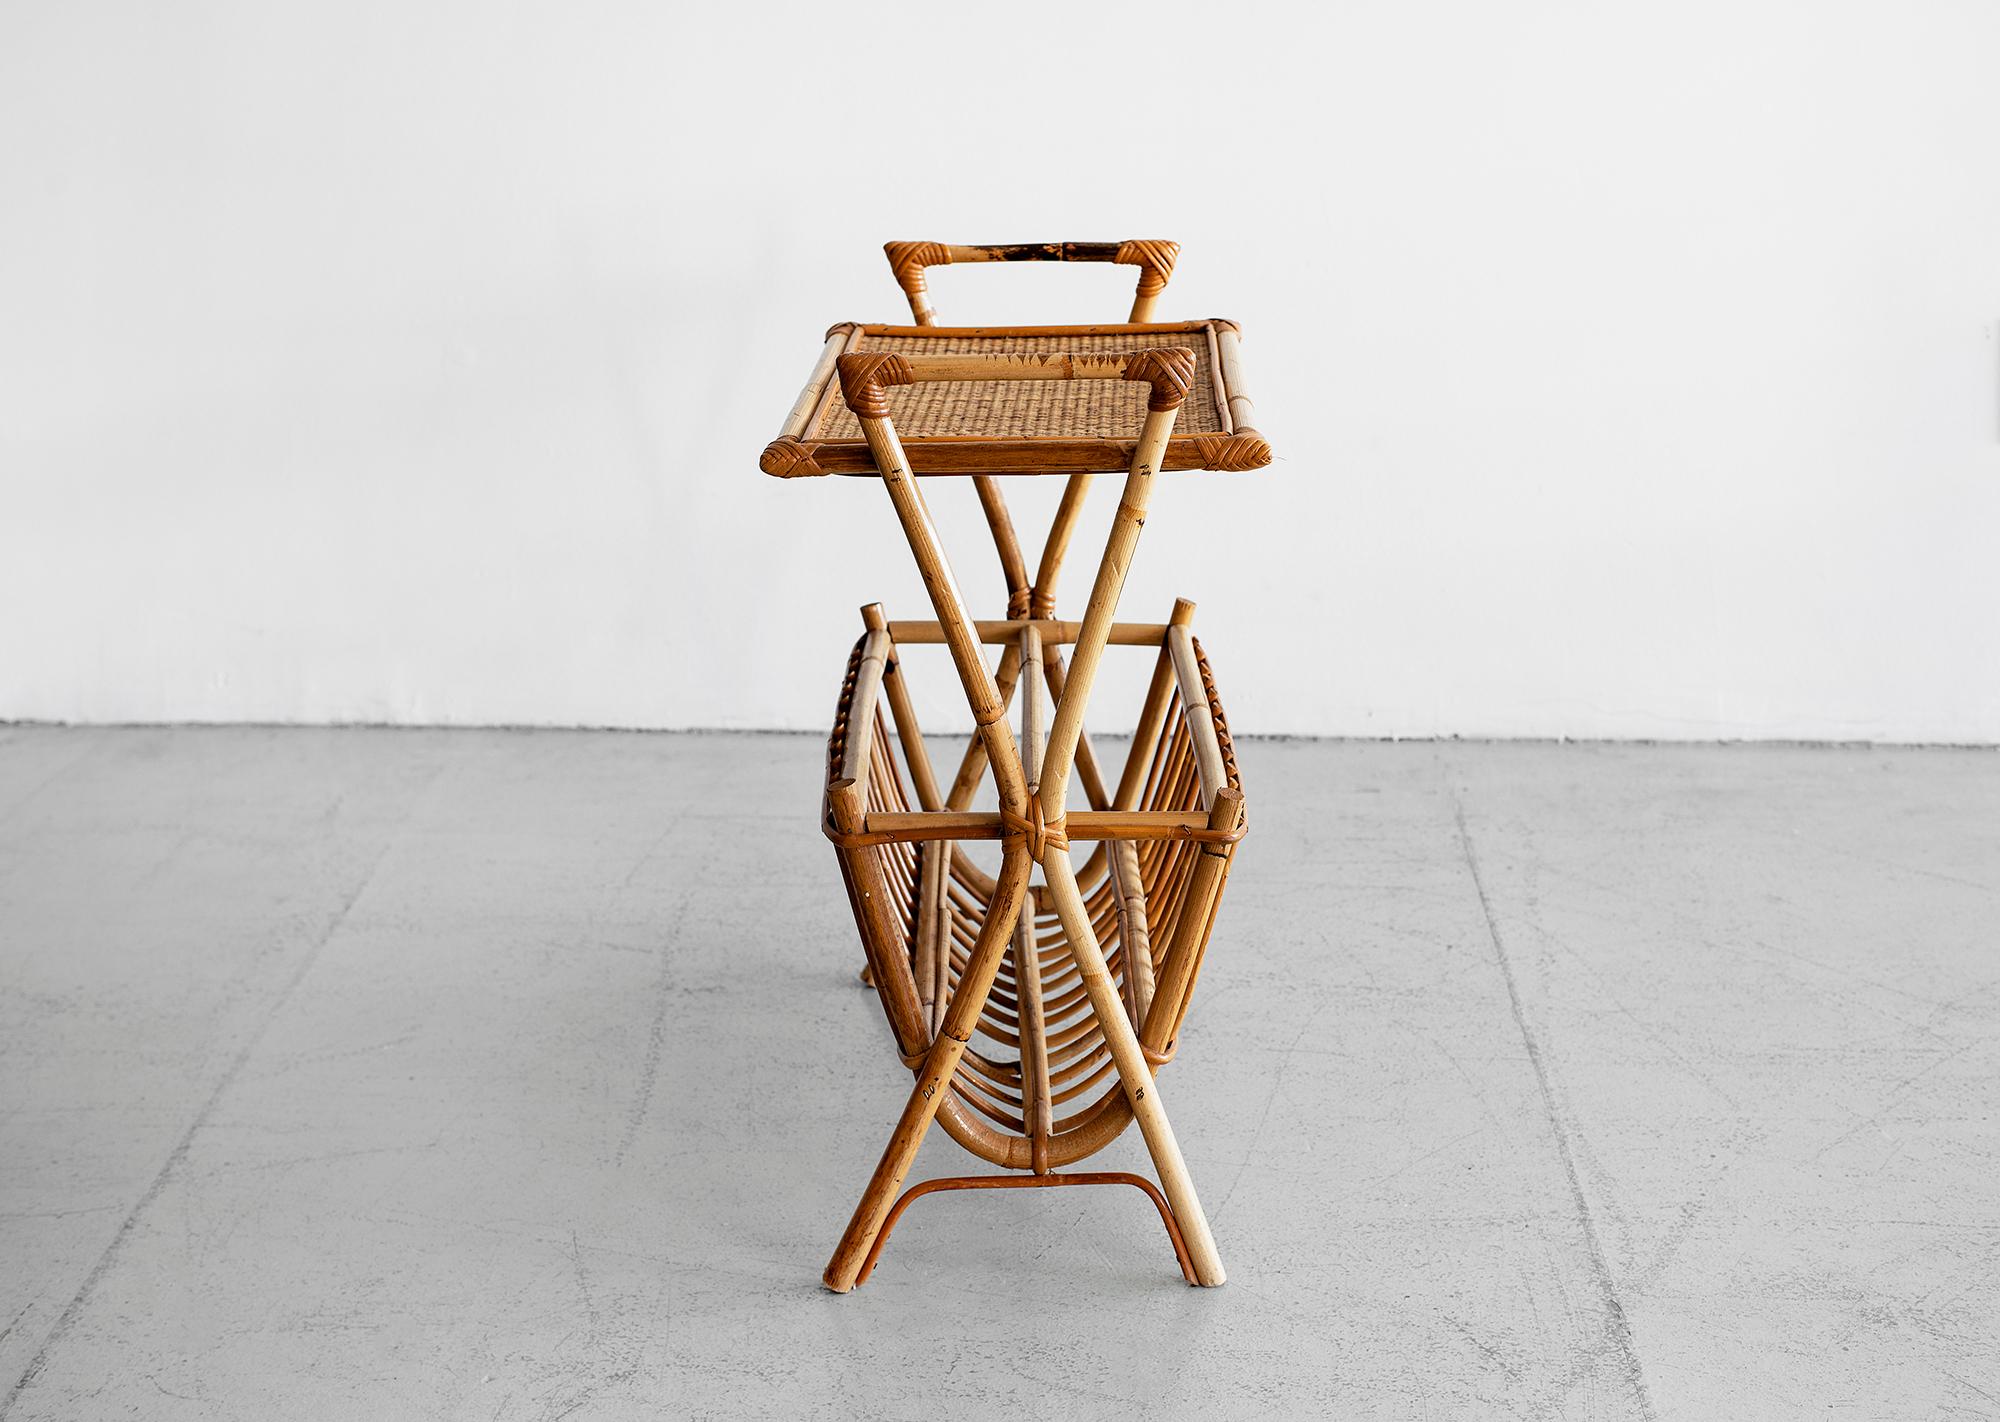 French rattan magazine holder and side table.
Charming from every angle and functional!